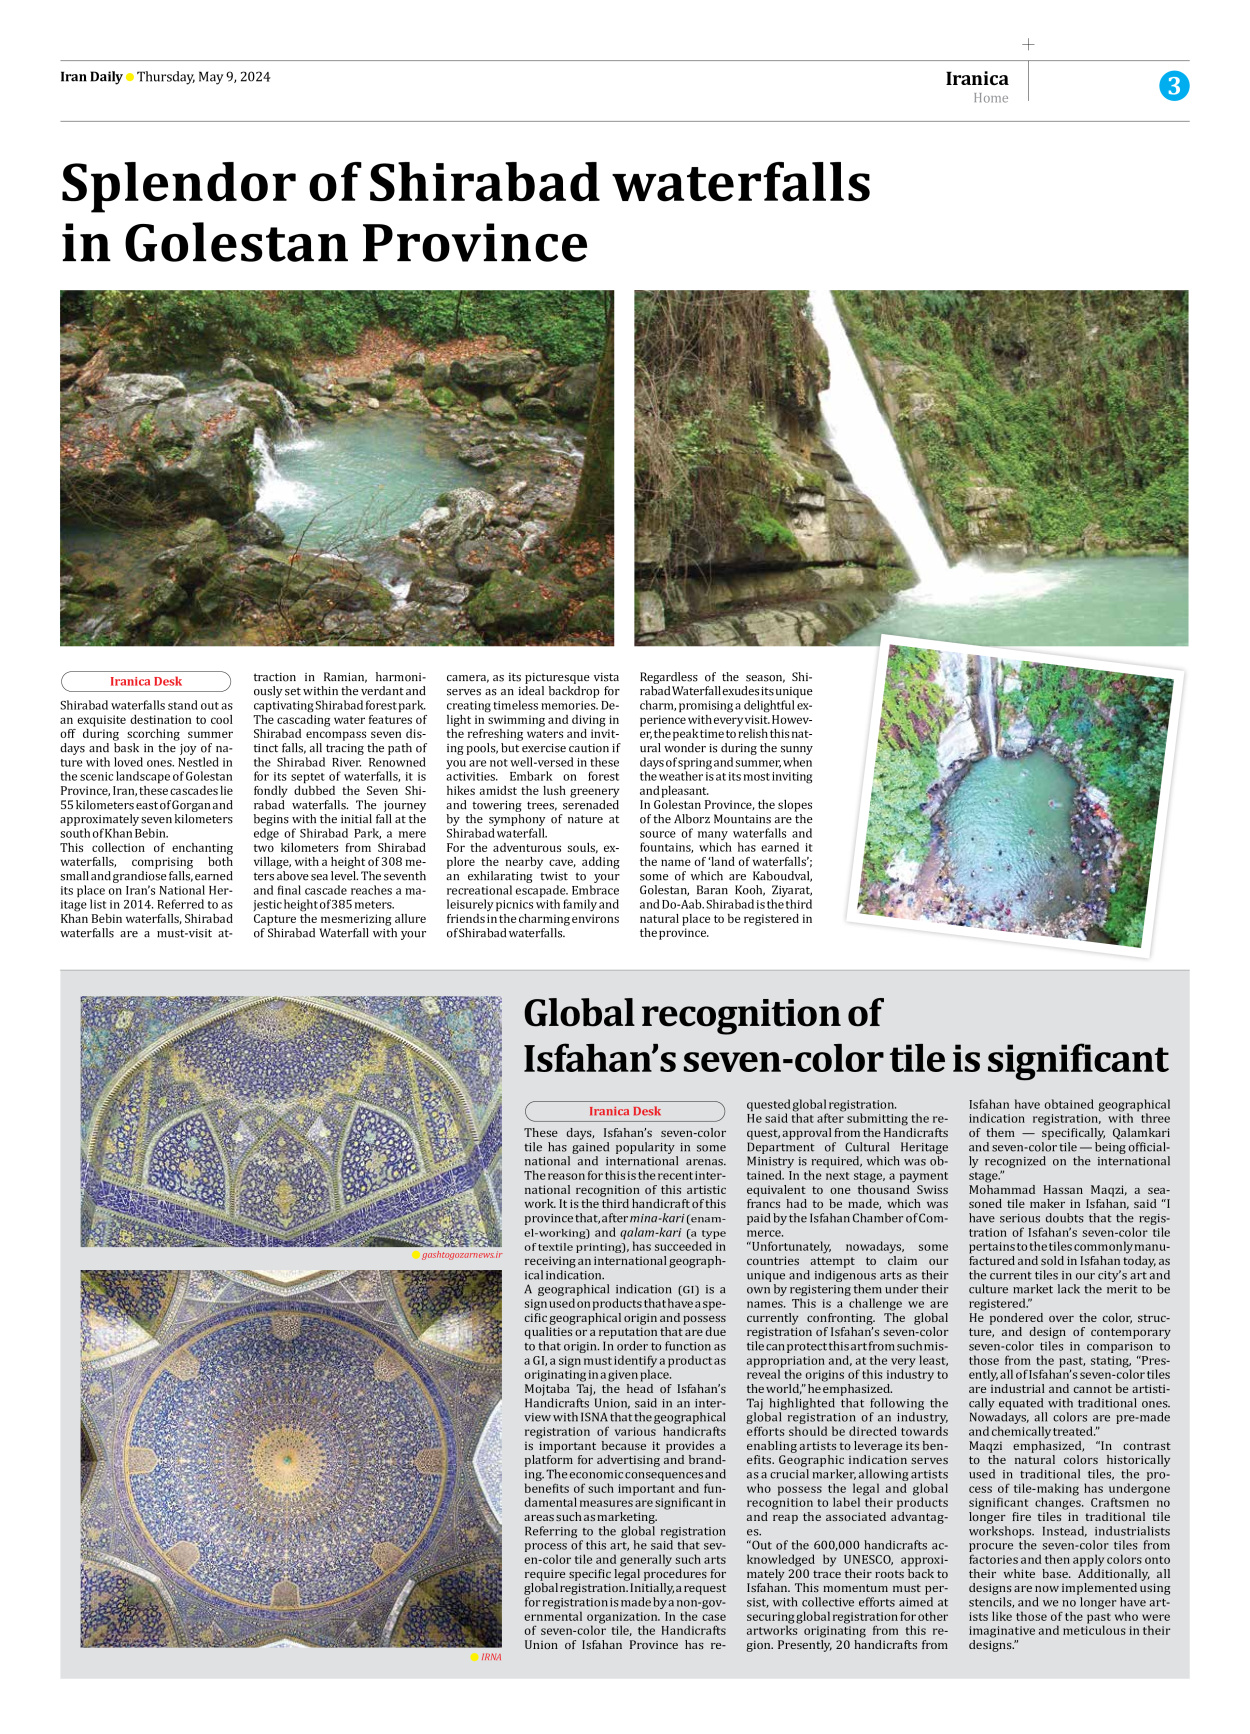 Iran Daily - Number Seven Thousand Five Hundred and Fifty Three - 09 May 2024 - Page 3